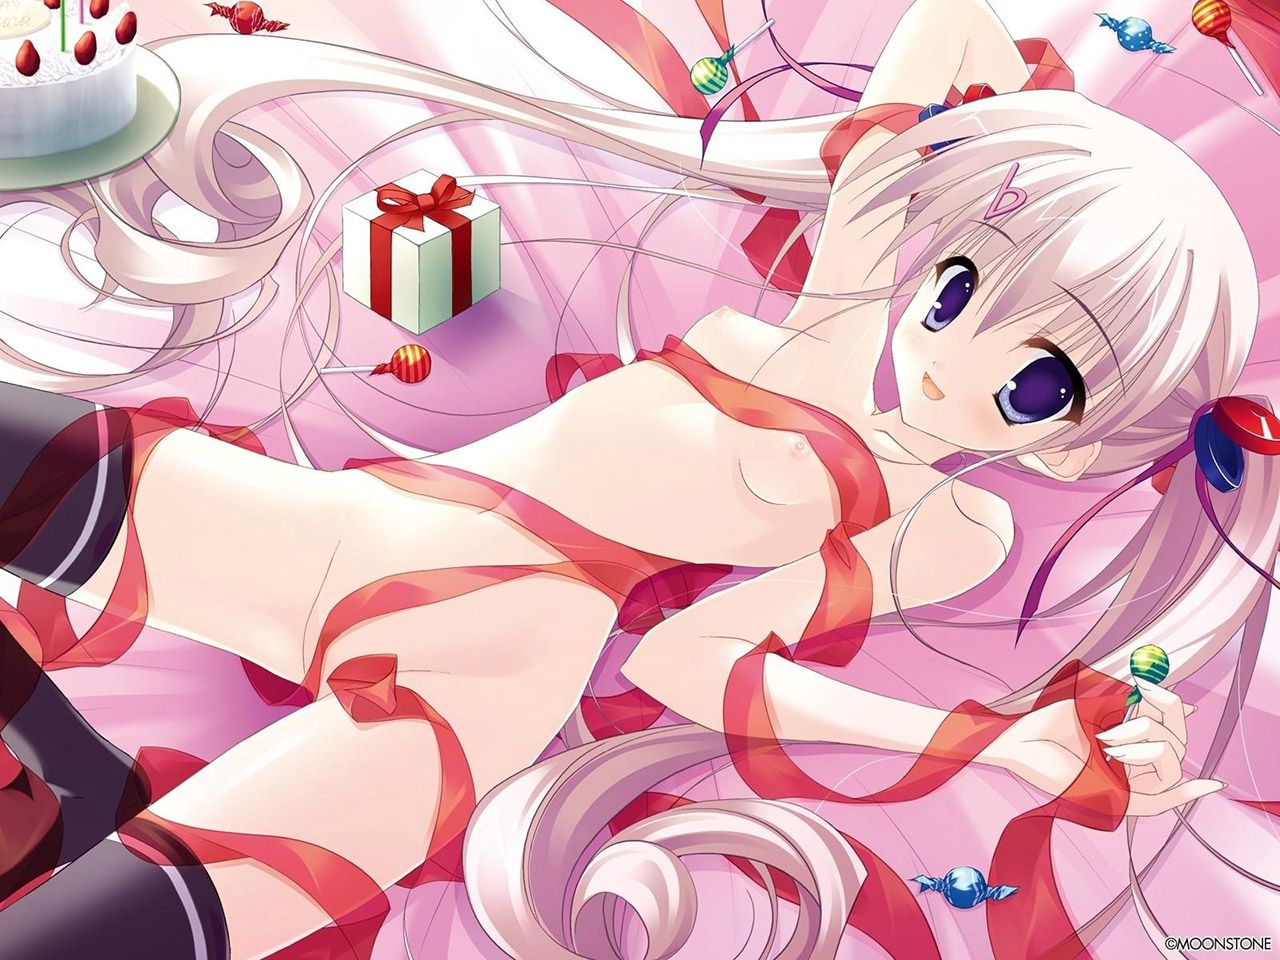 Hentai girl in 2-dimensional ribbons pictures 48 10